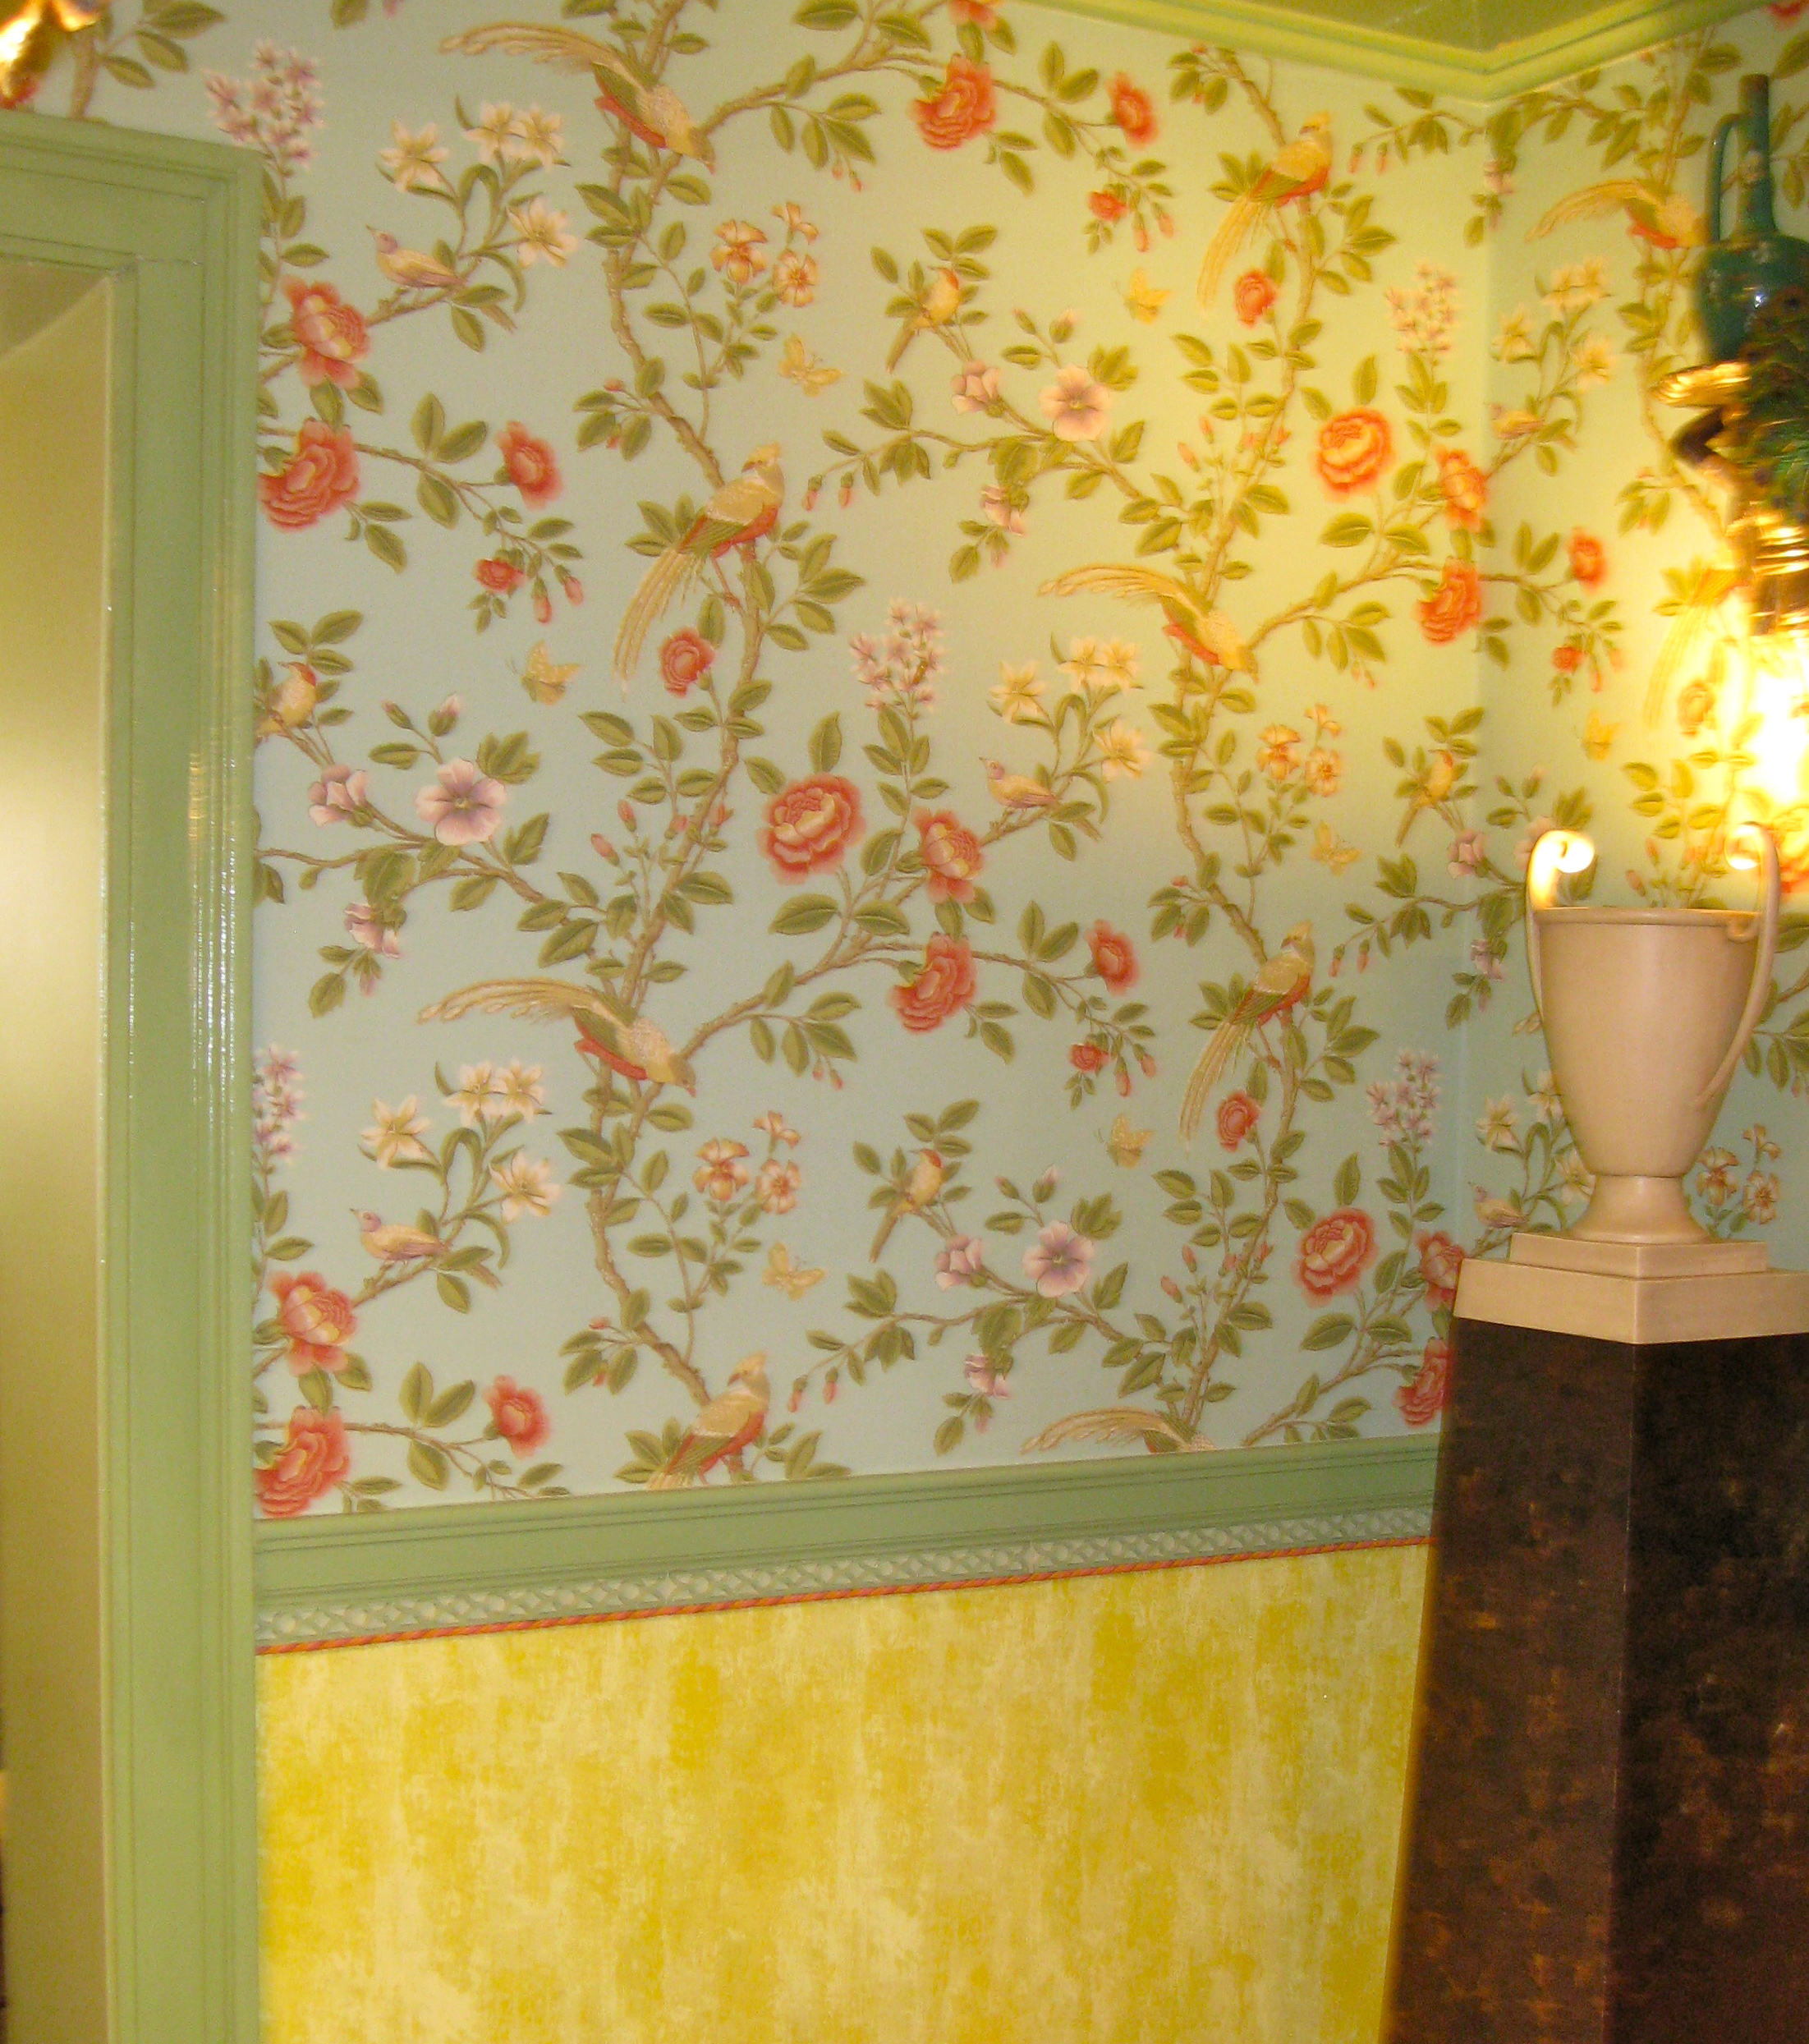 Beachler S Wallpaper Sales Offers Guaranteed Low Discount Prices